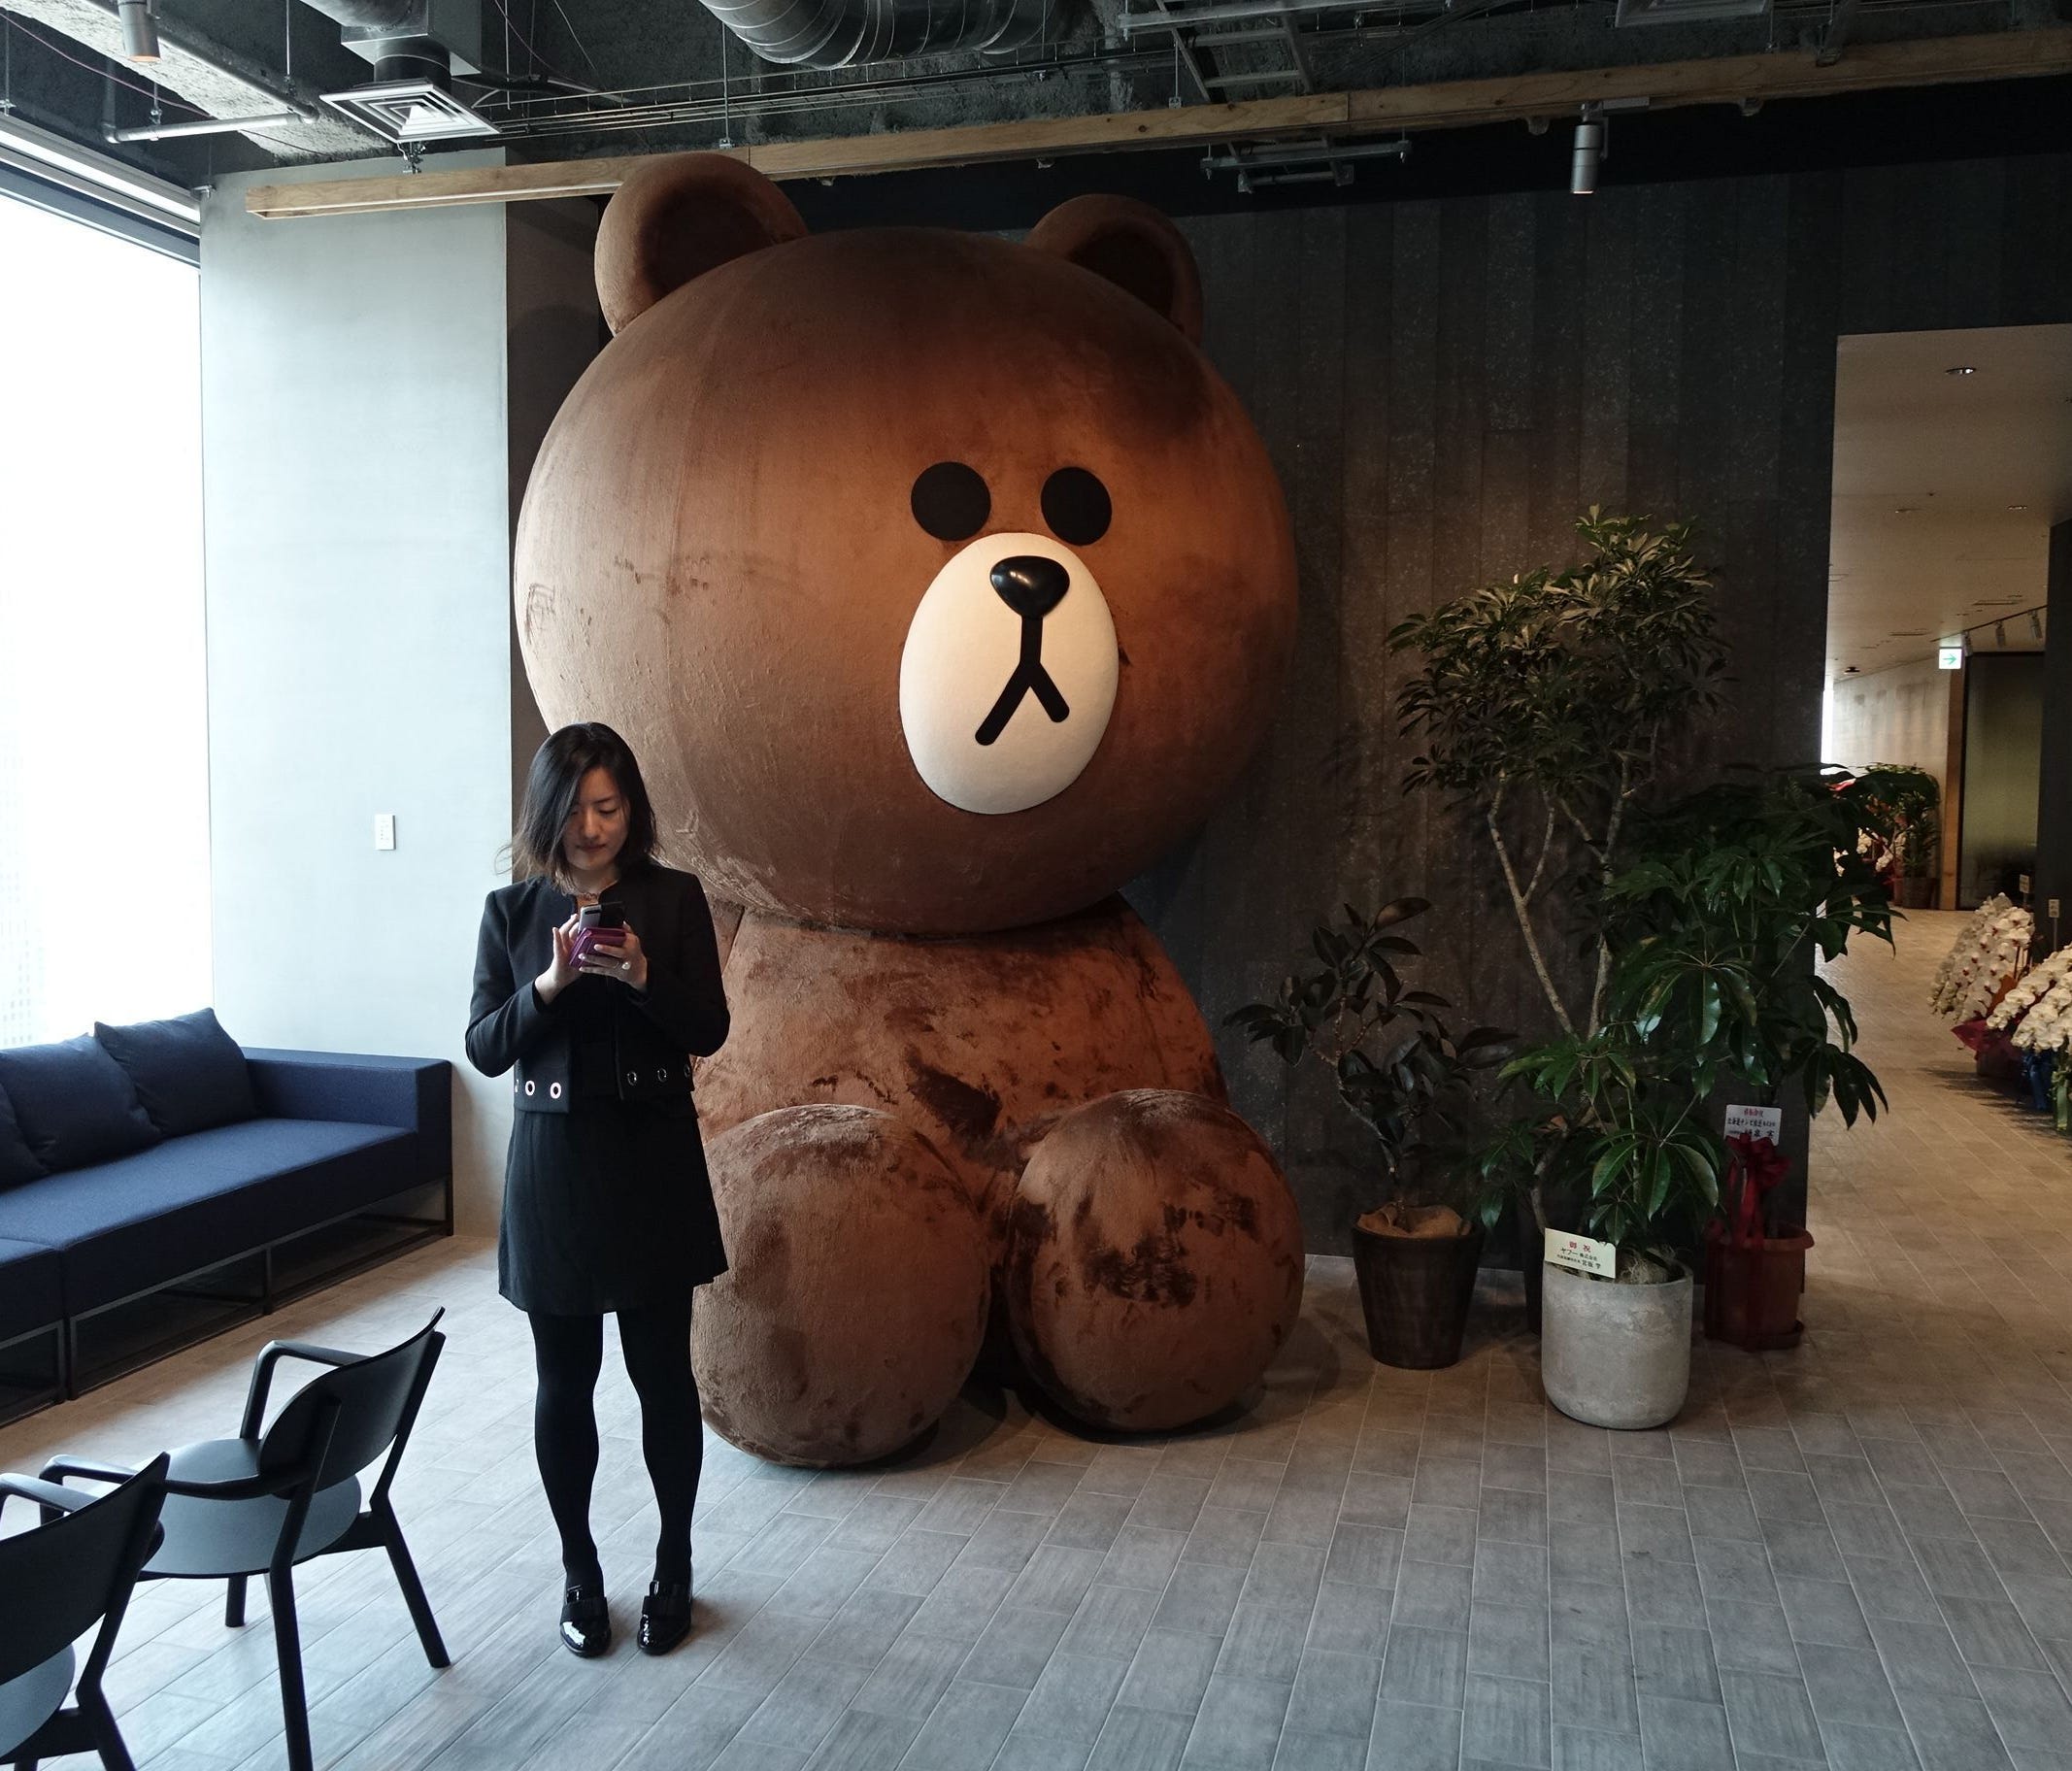 The offices at Line Corp. in Tokyo